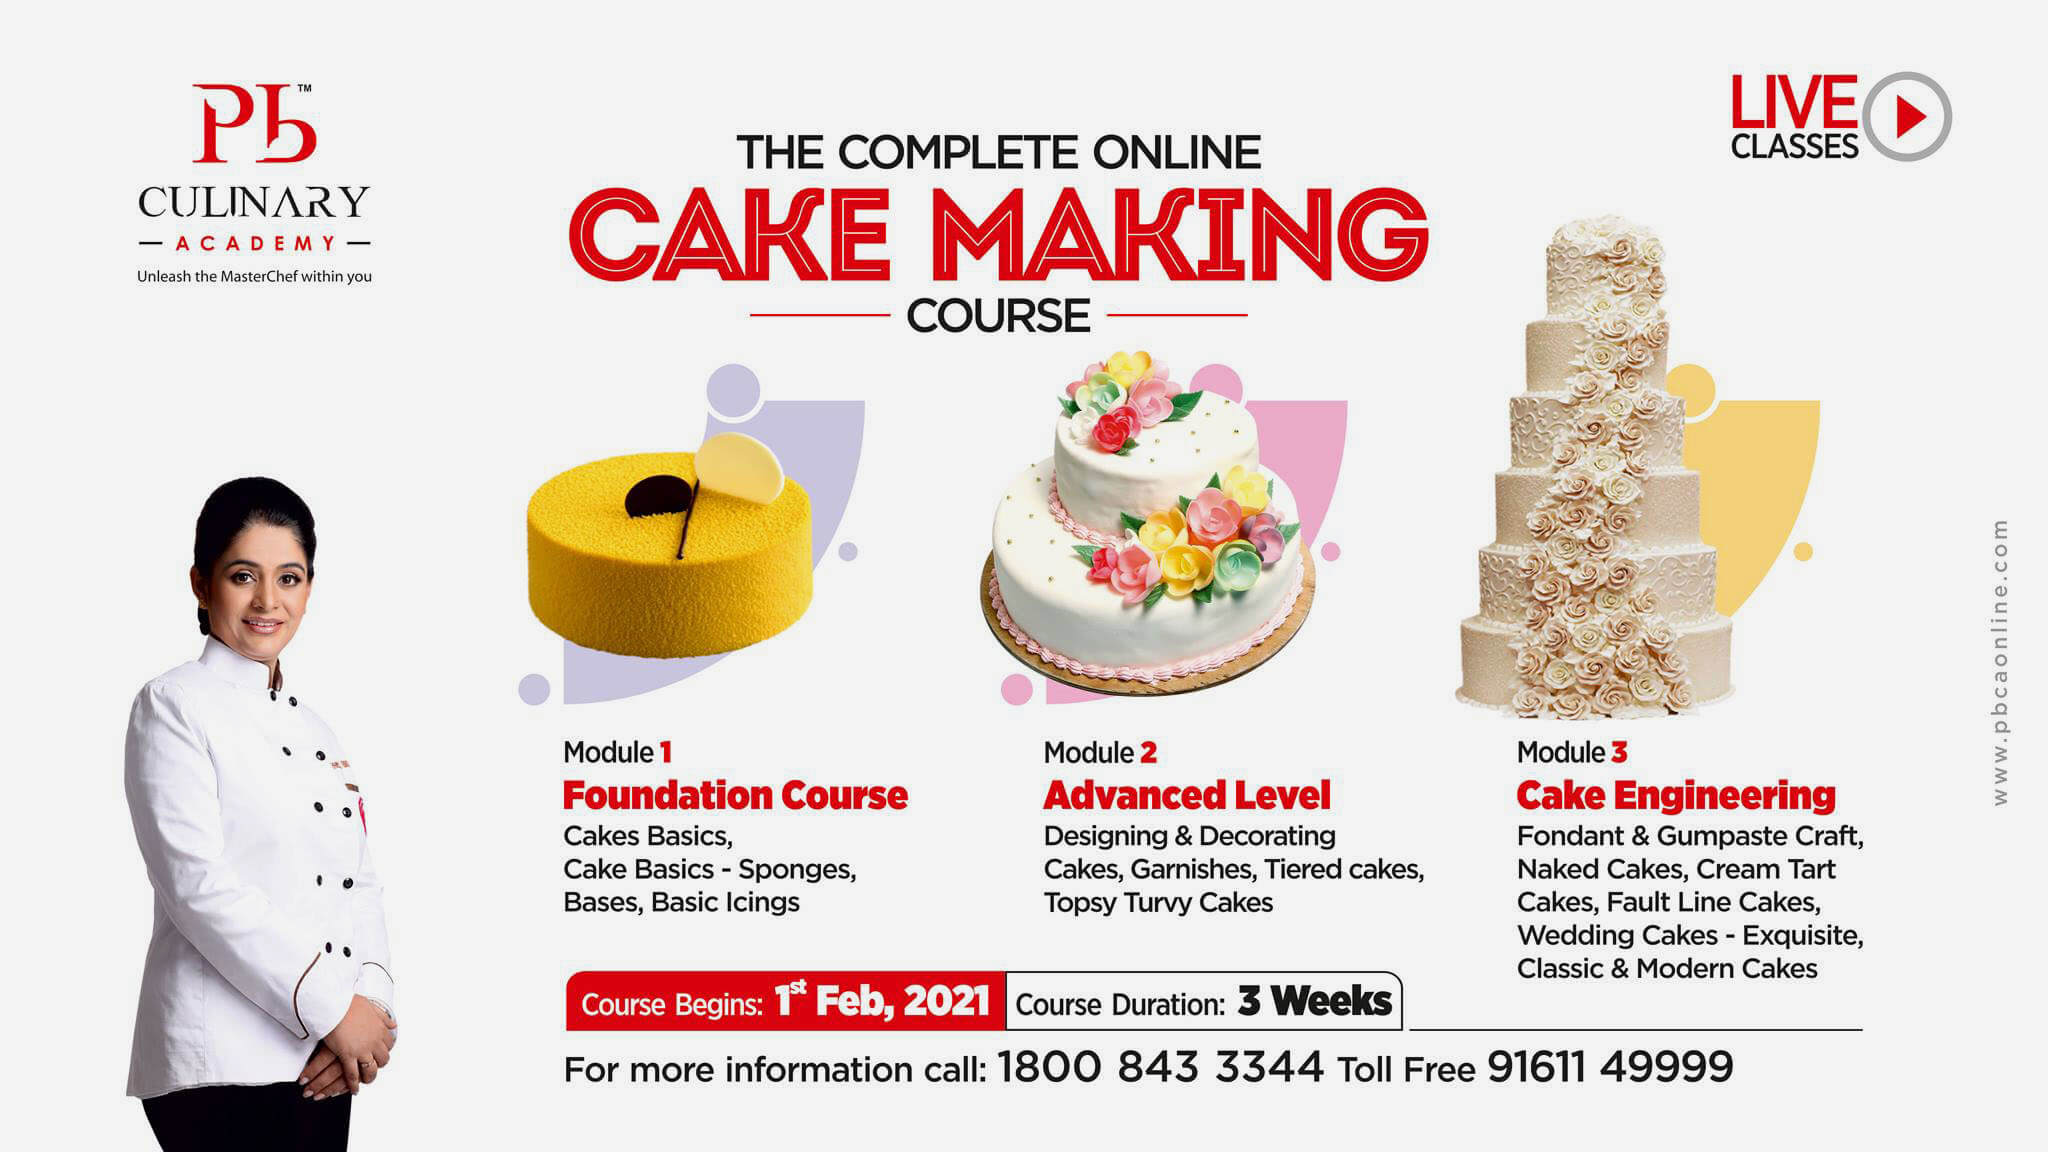 Basic to advcake class Thane fees 1800 onlin class available contact  7506832879 online fees 1500  YouTube